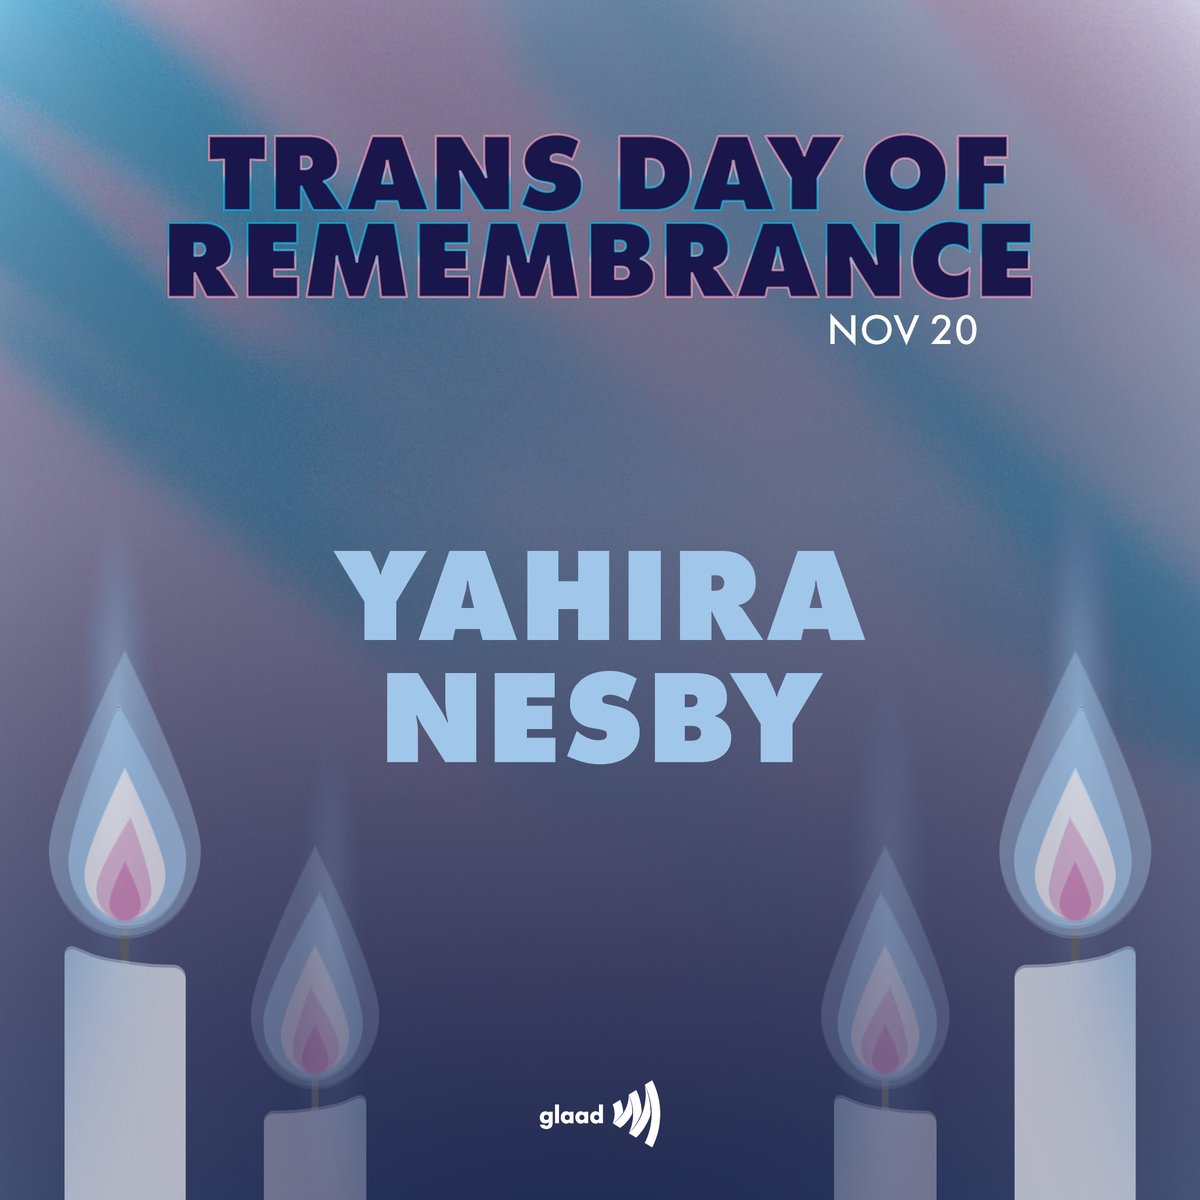 Yahira Nesby, a Black transgender woman, was killed in New York on December 19, 2019. She was 33 years old.